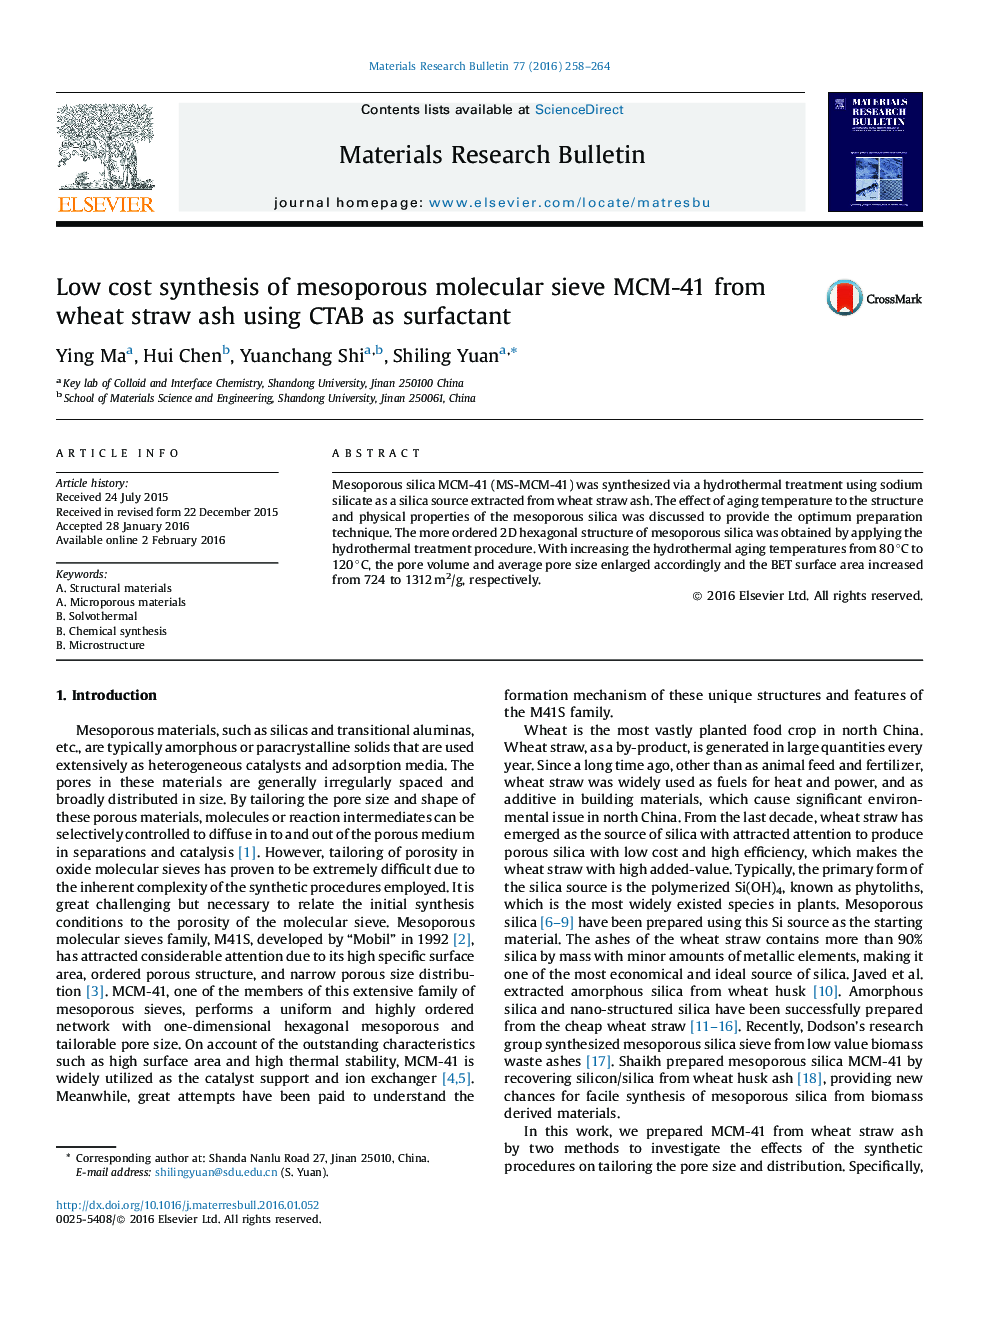 Low cost synthesis of mesoporous molecular sieve MCM-41 from wheat straw ash using CTAB as surfactant